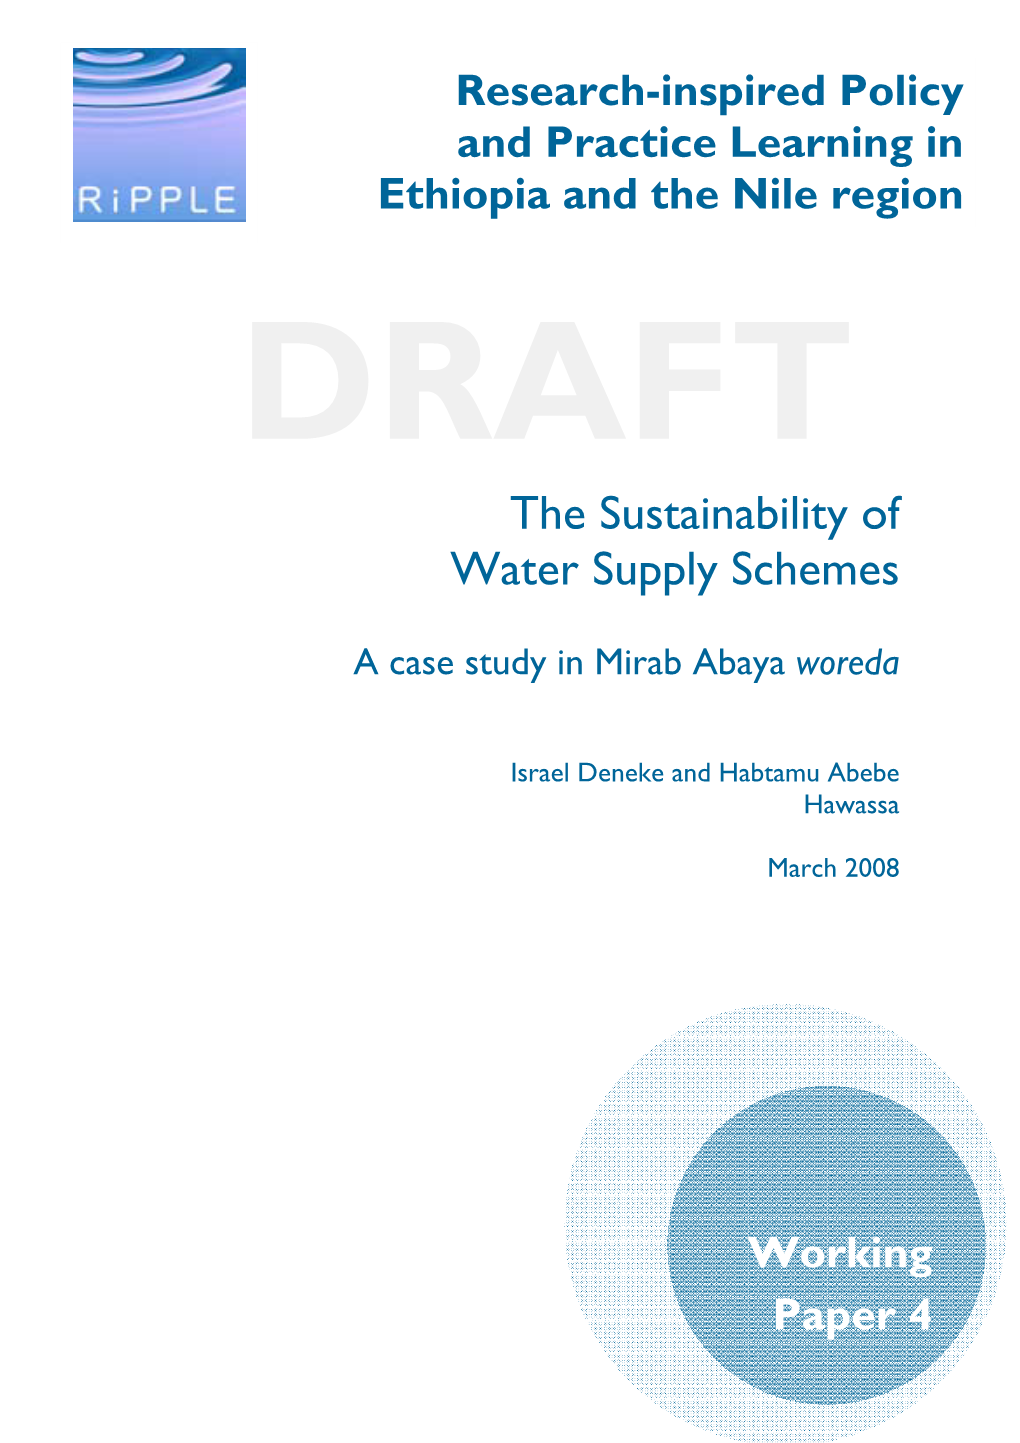 The Sustainability of Water Supply Schemes